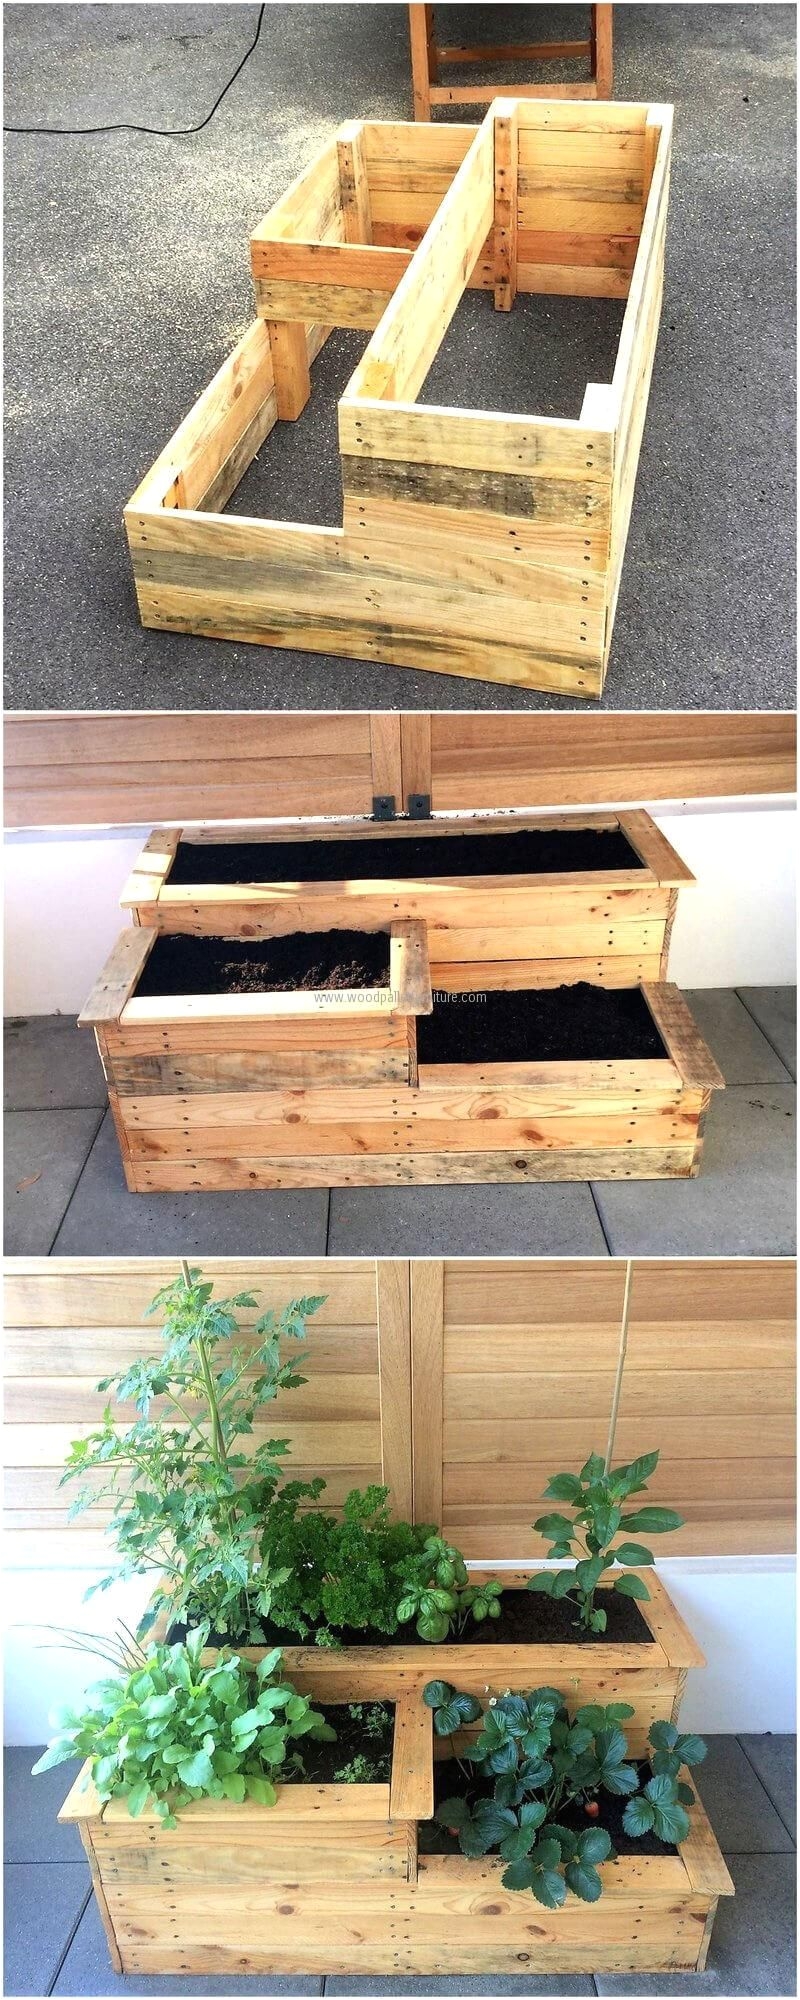 for the decoration lovers here is an idea for decorating the home in a unique way with the repurposed wood pallet planter in which the flower of different